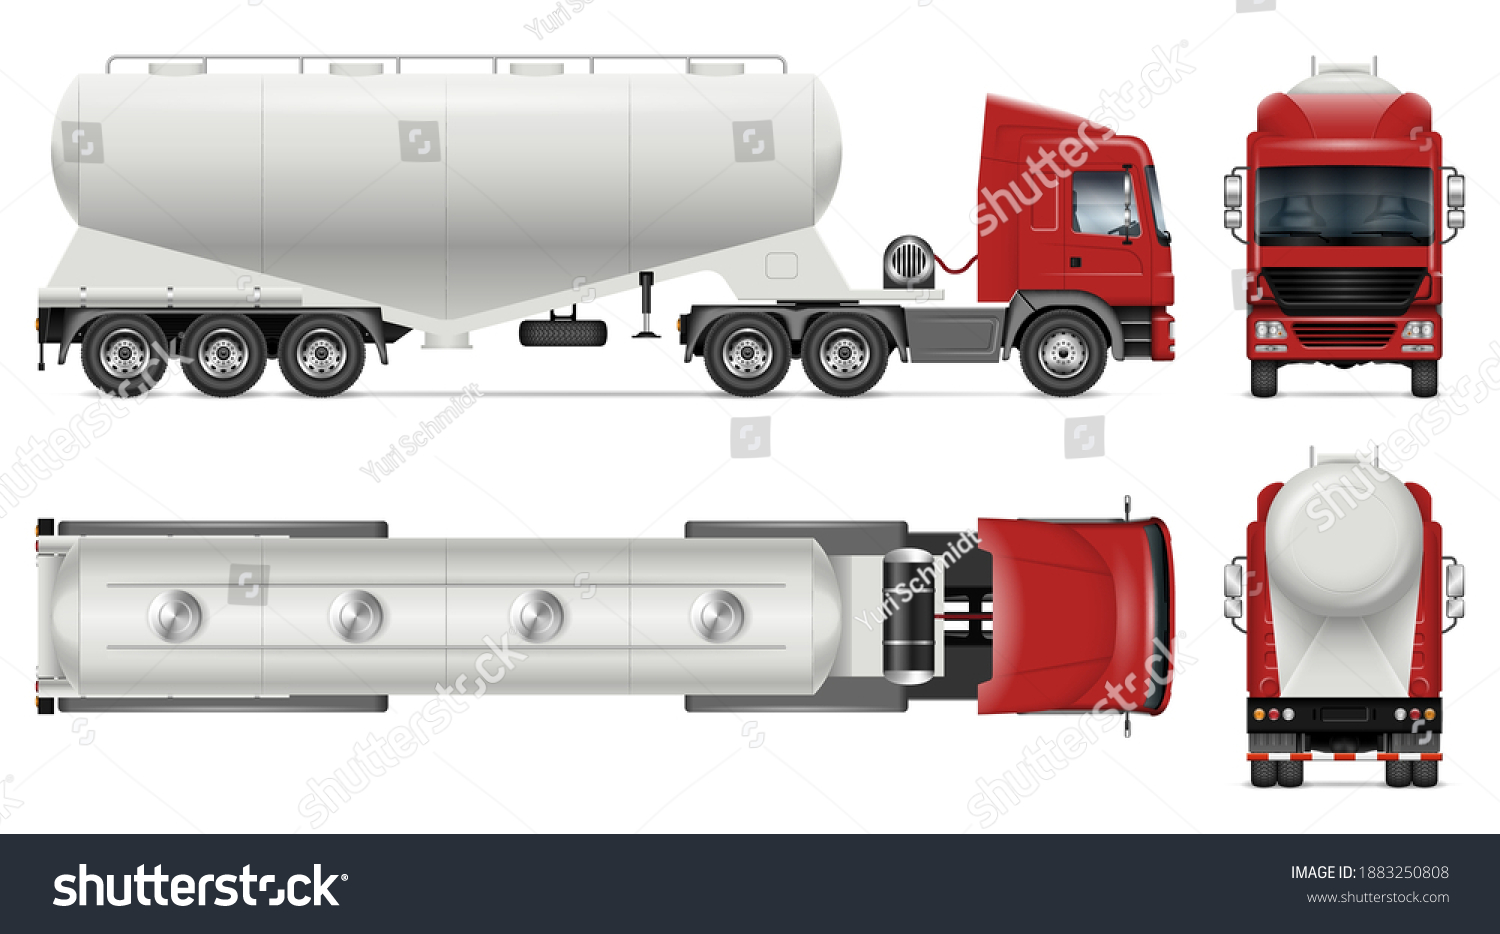 SVG of Dry bulk tanker trailer truck vector mockup on white for vehicle branding, corporate identity. View from side, front, back, top. All elements in groups on separate layers for easy editing and recolor svg